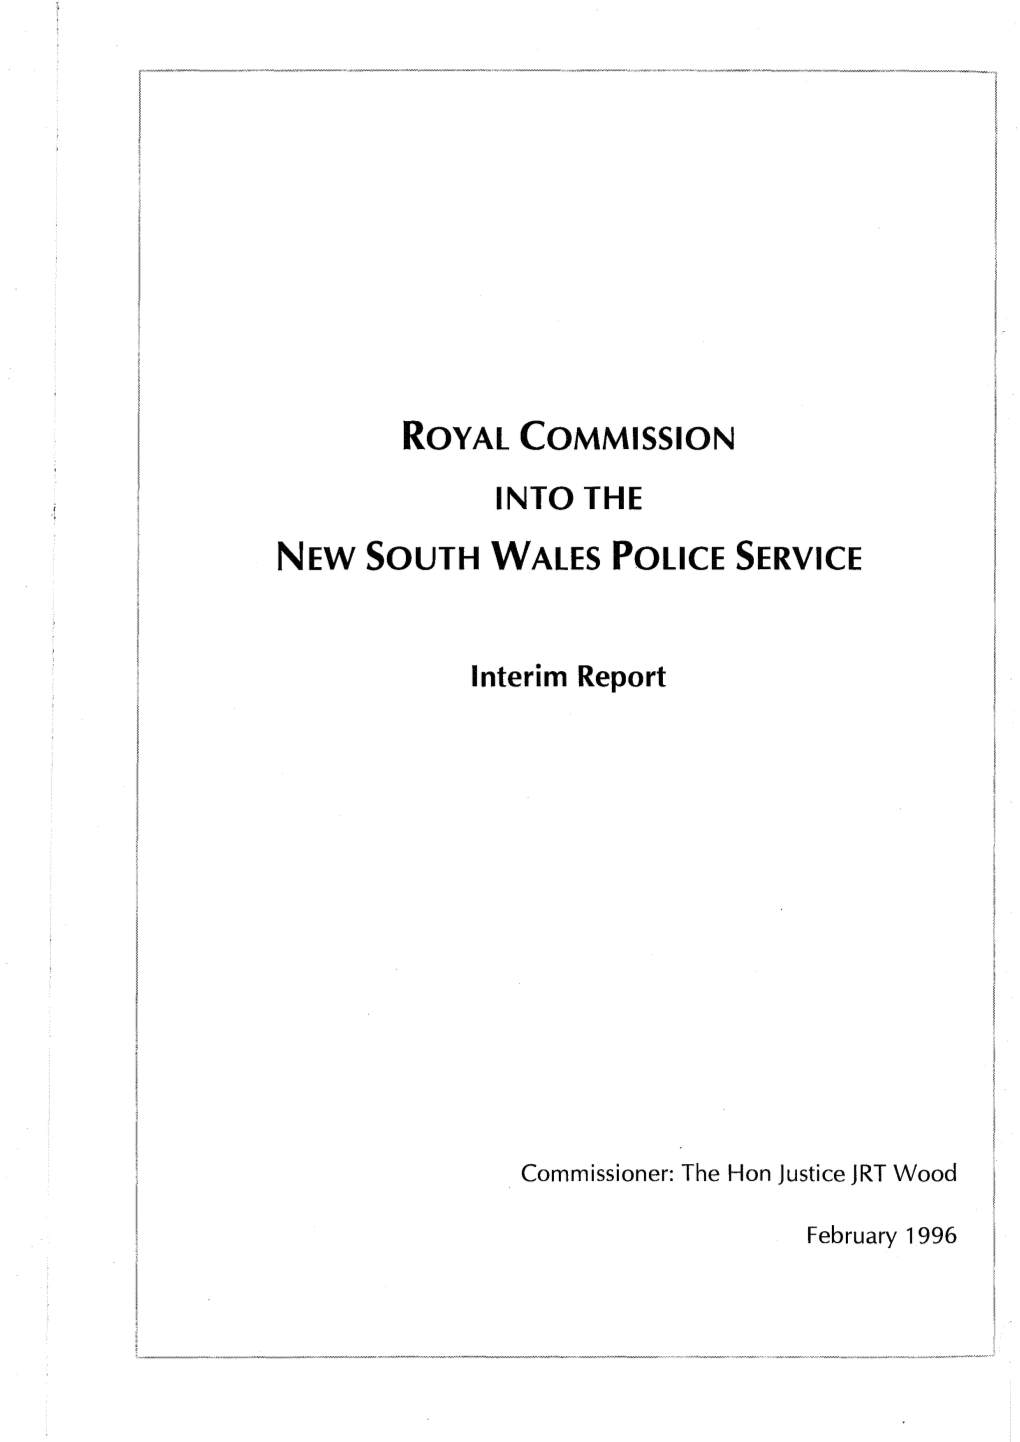 Royal Commission Into the New South Wales Police Service